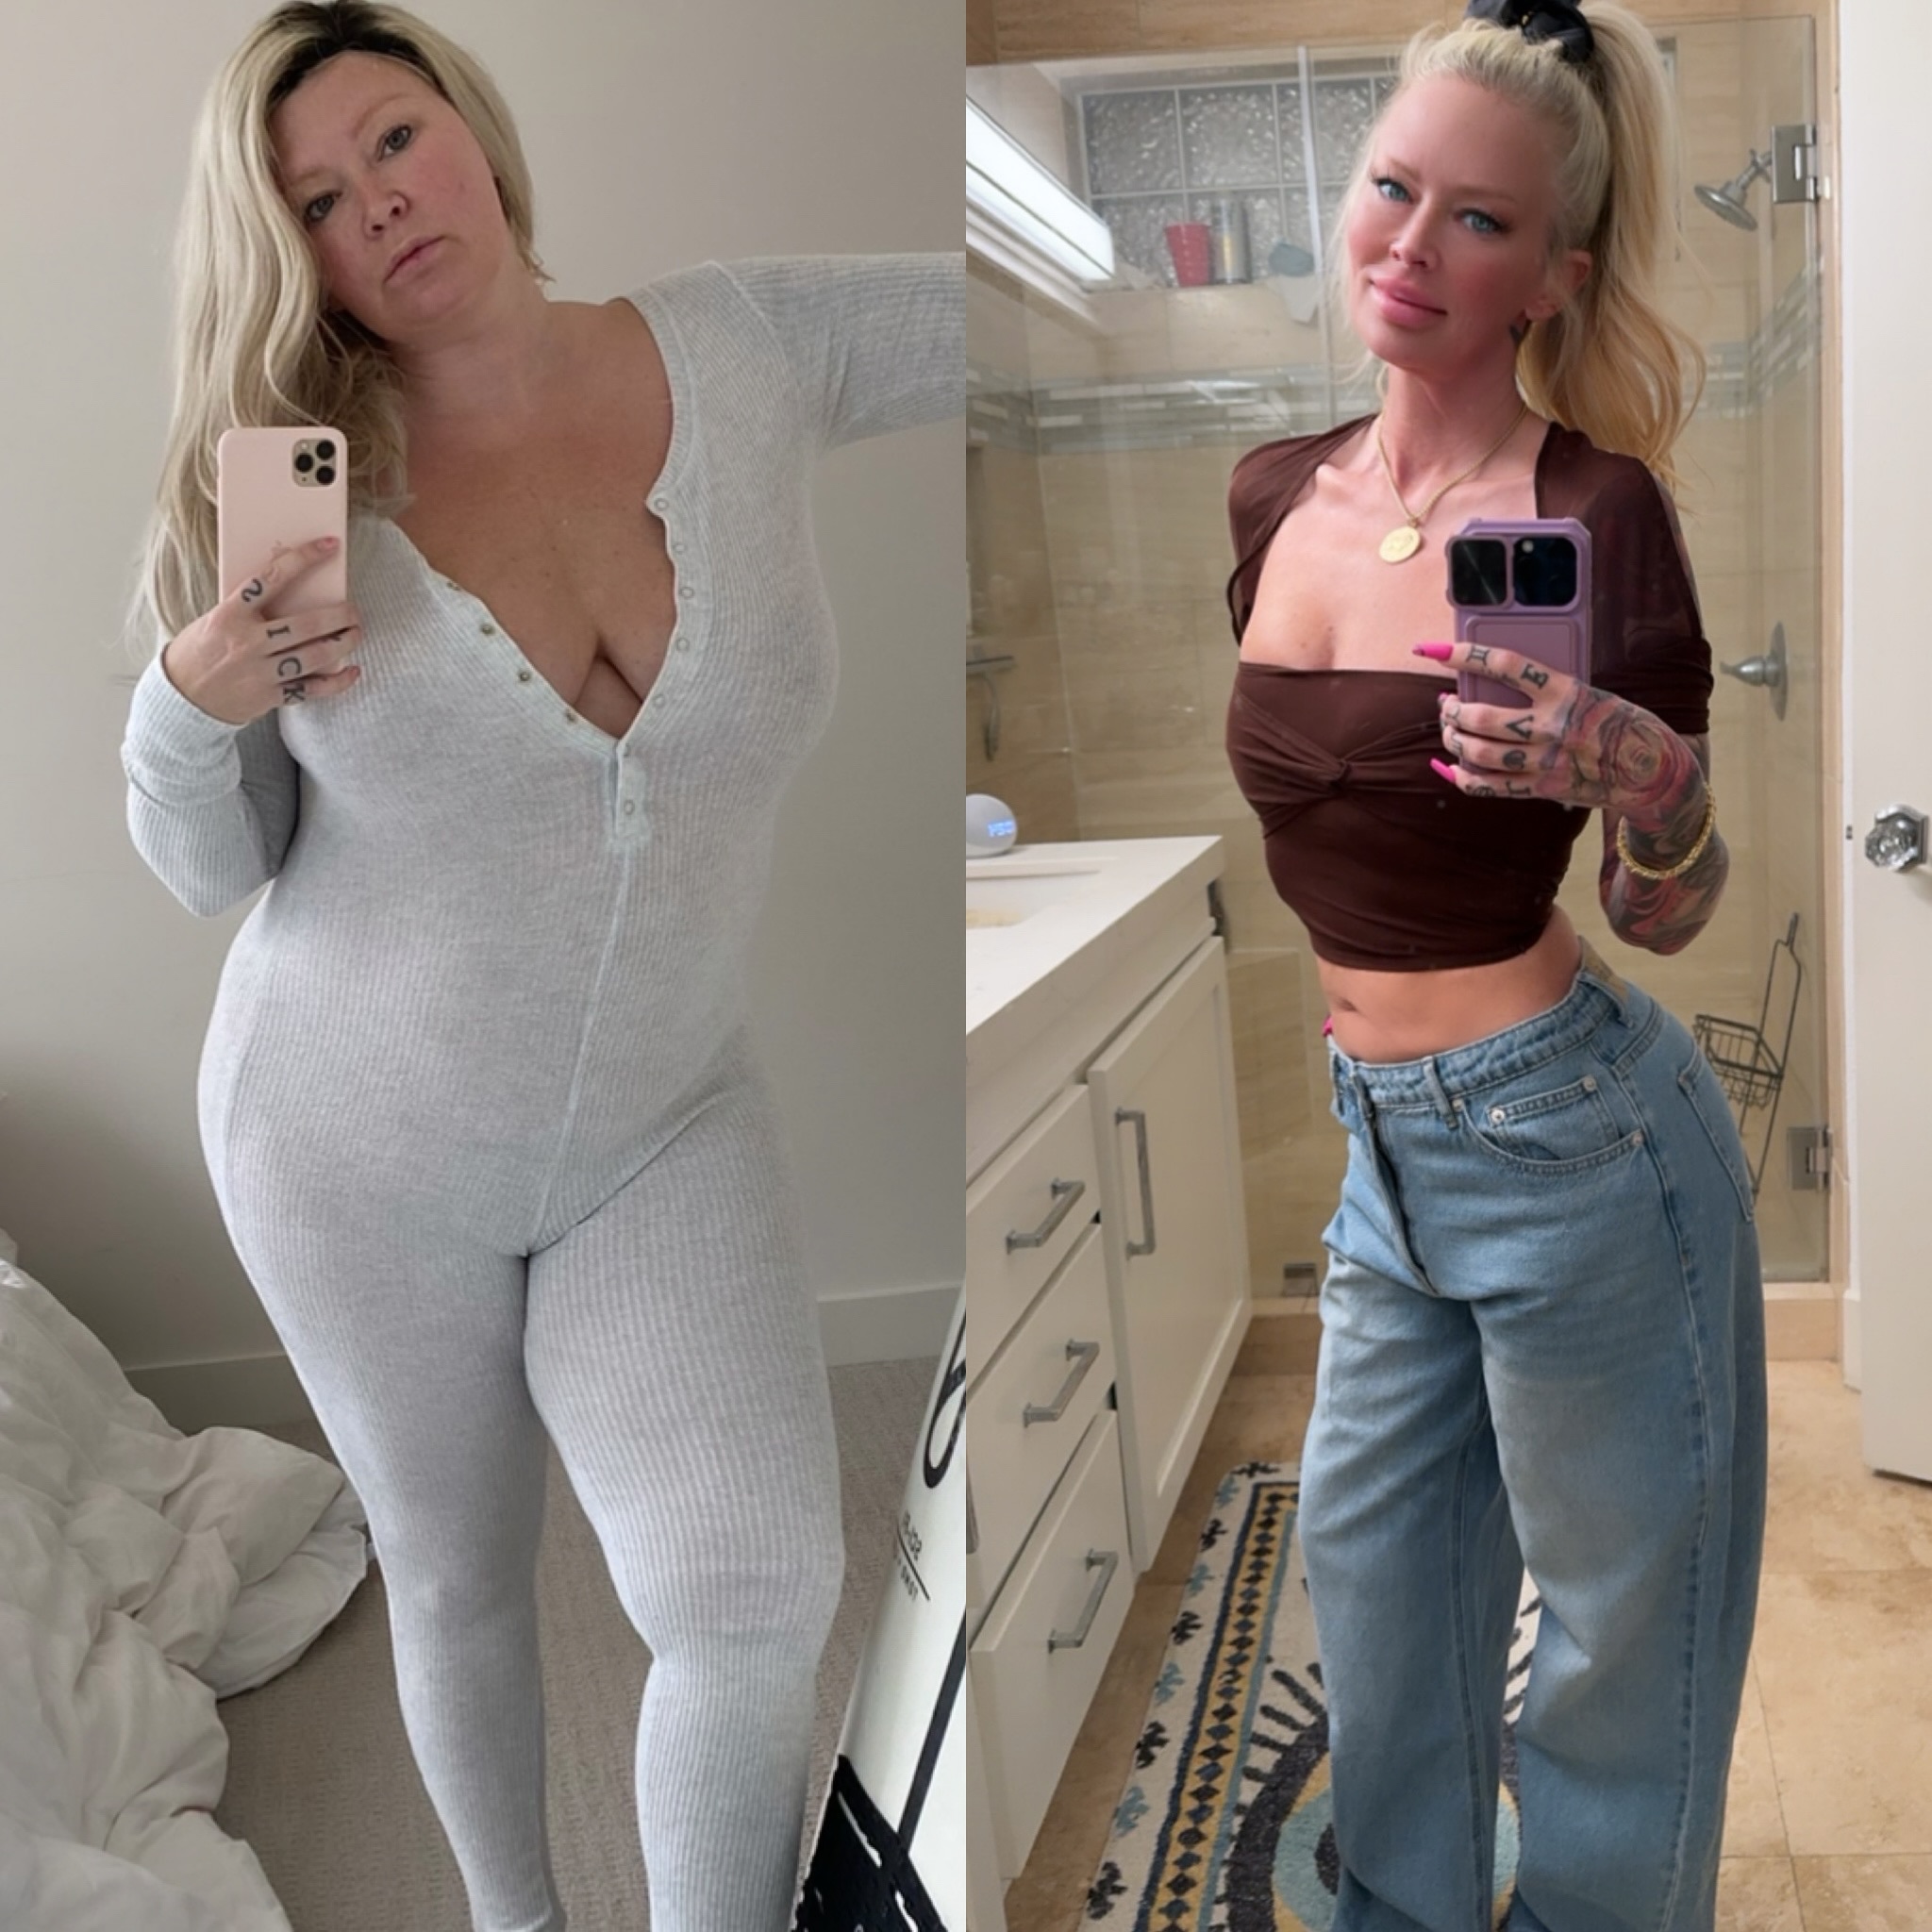 Jenna showed off her fuller figure in a before and after comparison of her physical transformation